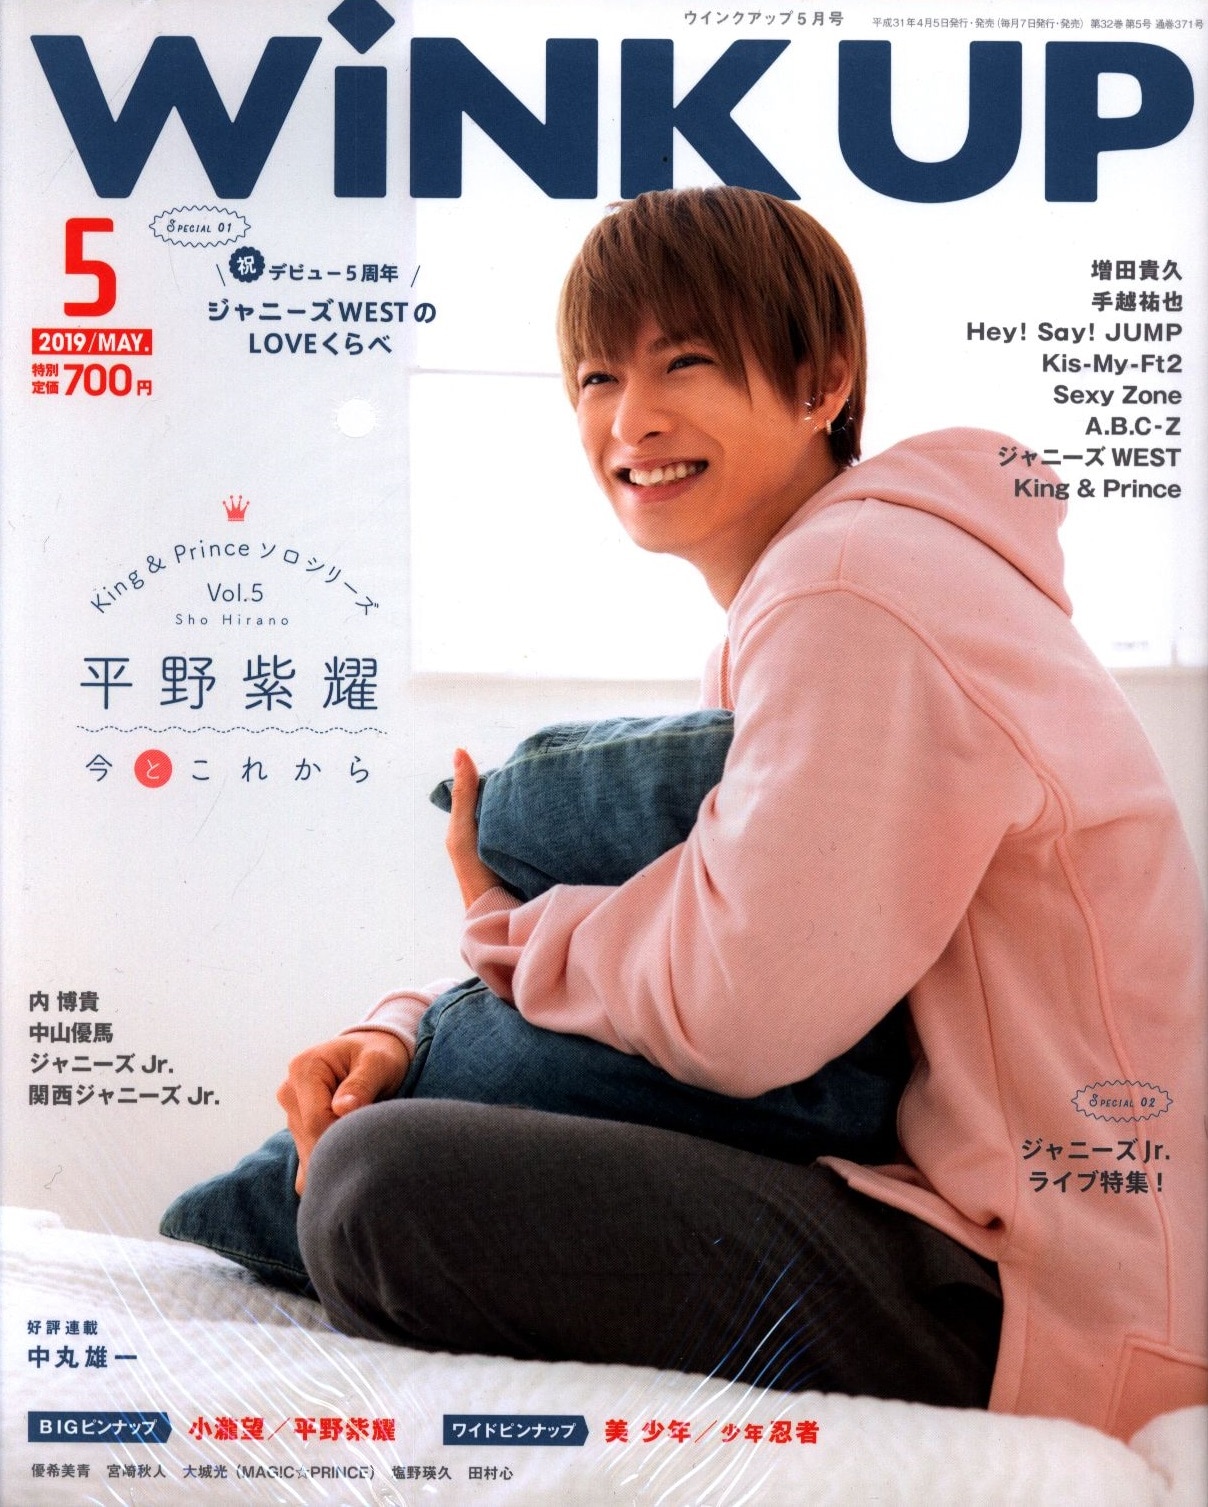 WiNK UP 2013年11月号 切り抜き - その他